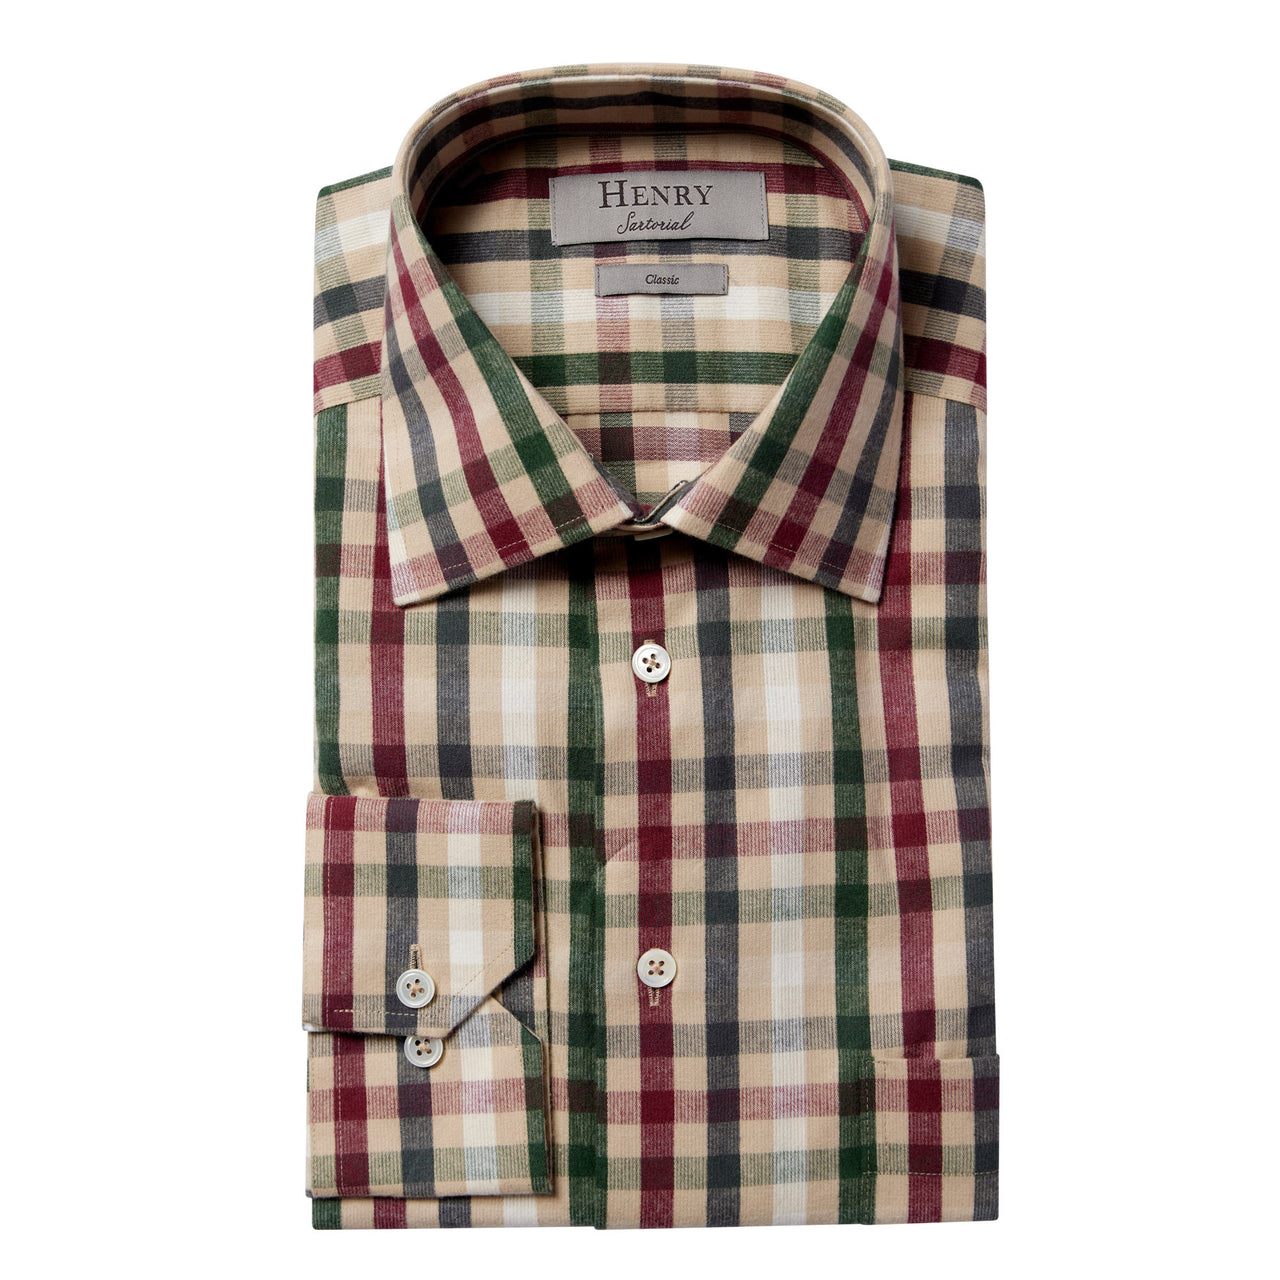 HENRY SARTORIAL Check Casual Shirt BEIGE MULTI